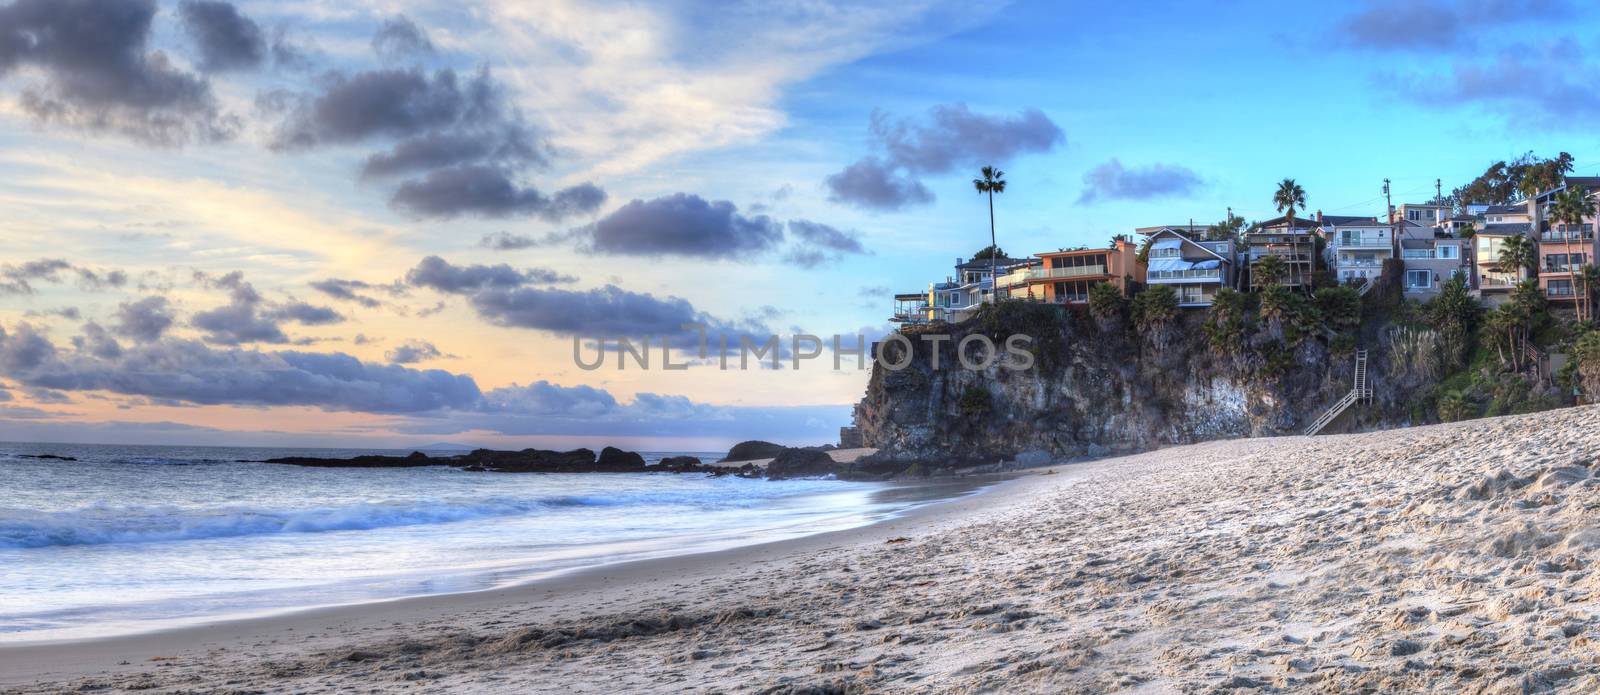 Sunset over the coastline of One Thousand Steps Beach with tidal pools and cliffs in Laguna Beach, California, USA